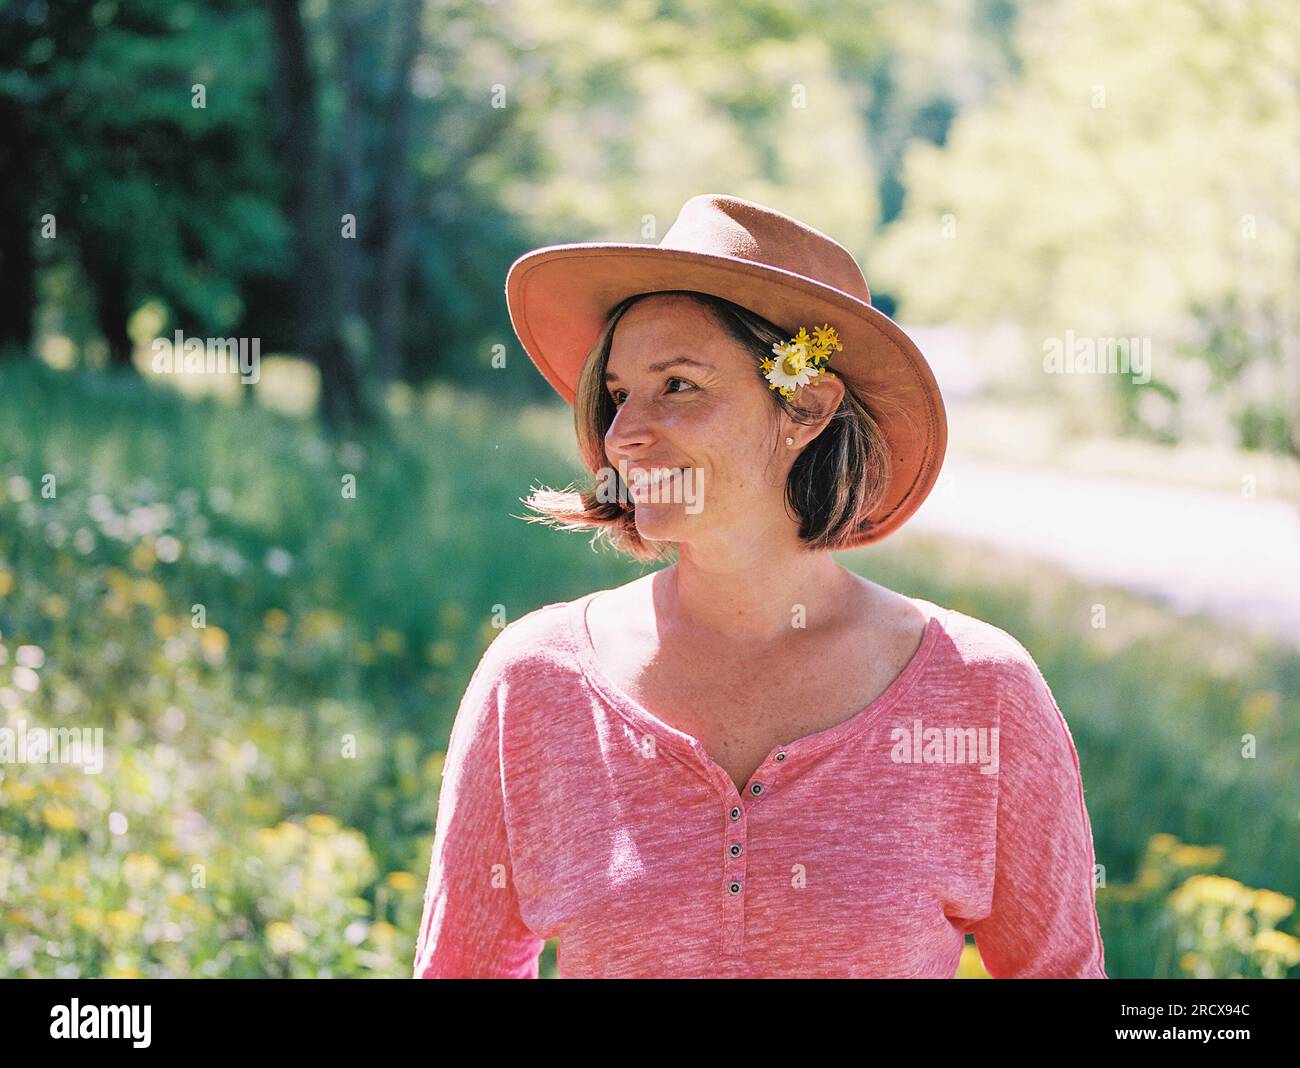 middle-aged woman in a brown hat, wildflowers tucked behind her ear Stock Photo